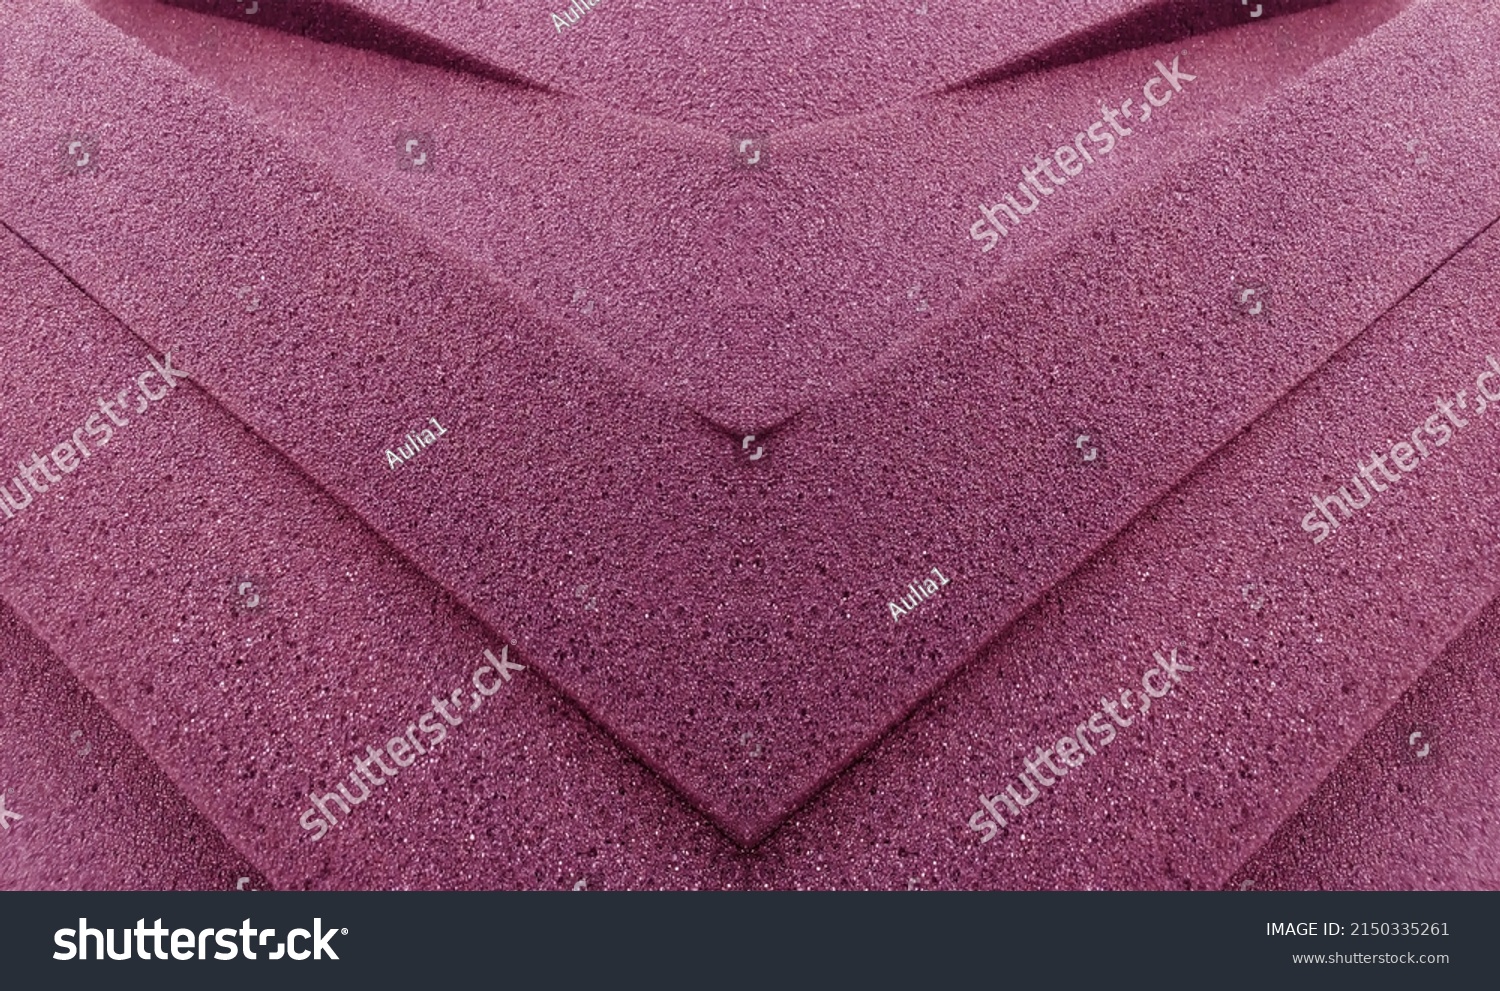 stacked thick foam material background. Purple texture in transverse style. foam sponge creativity #2150335261